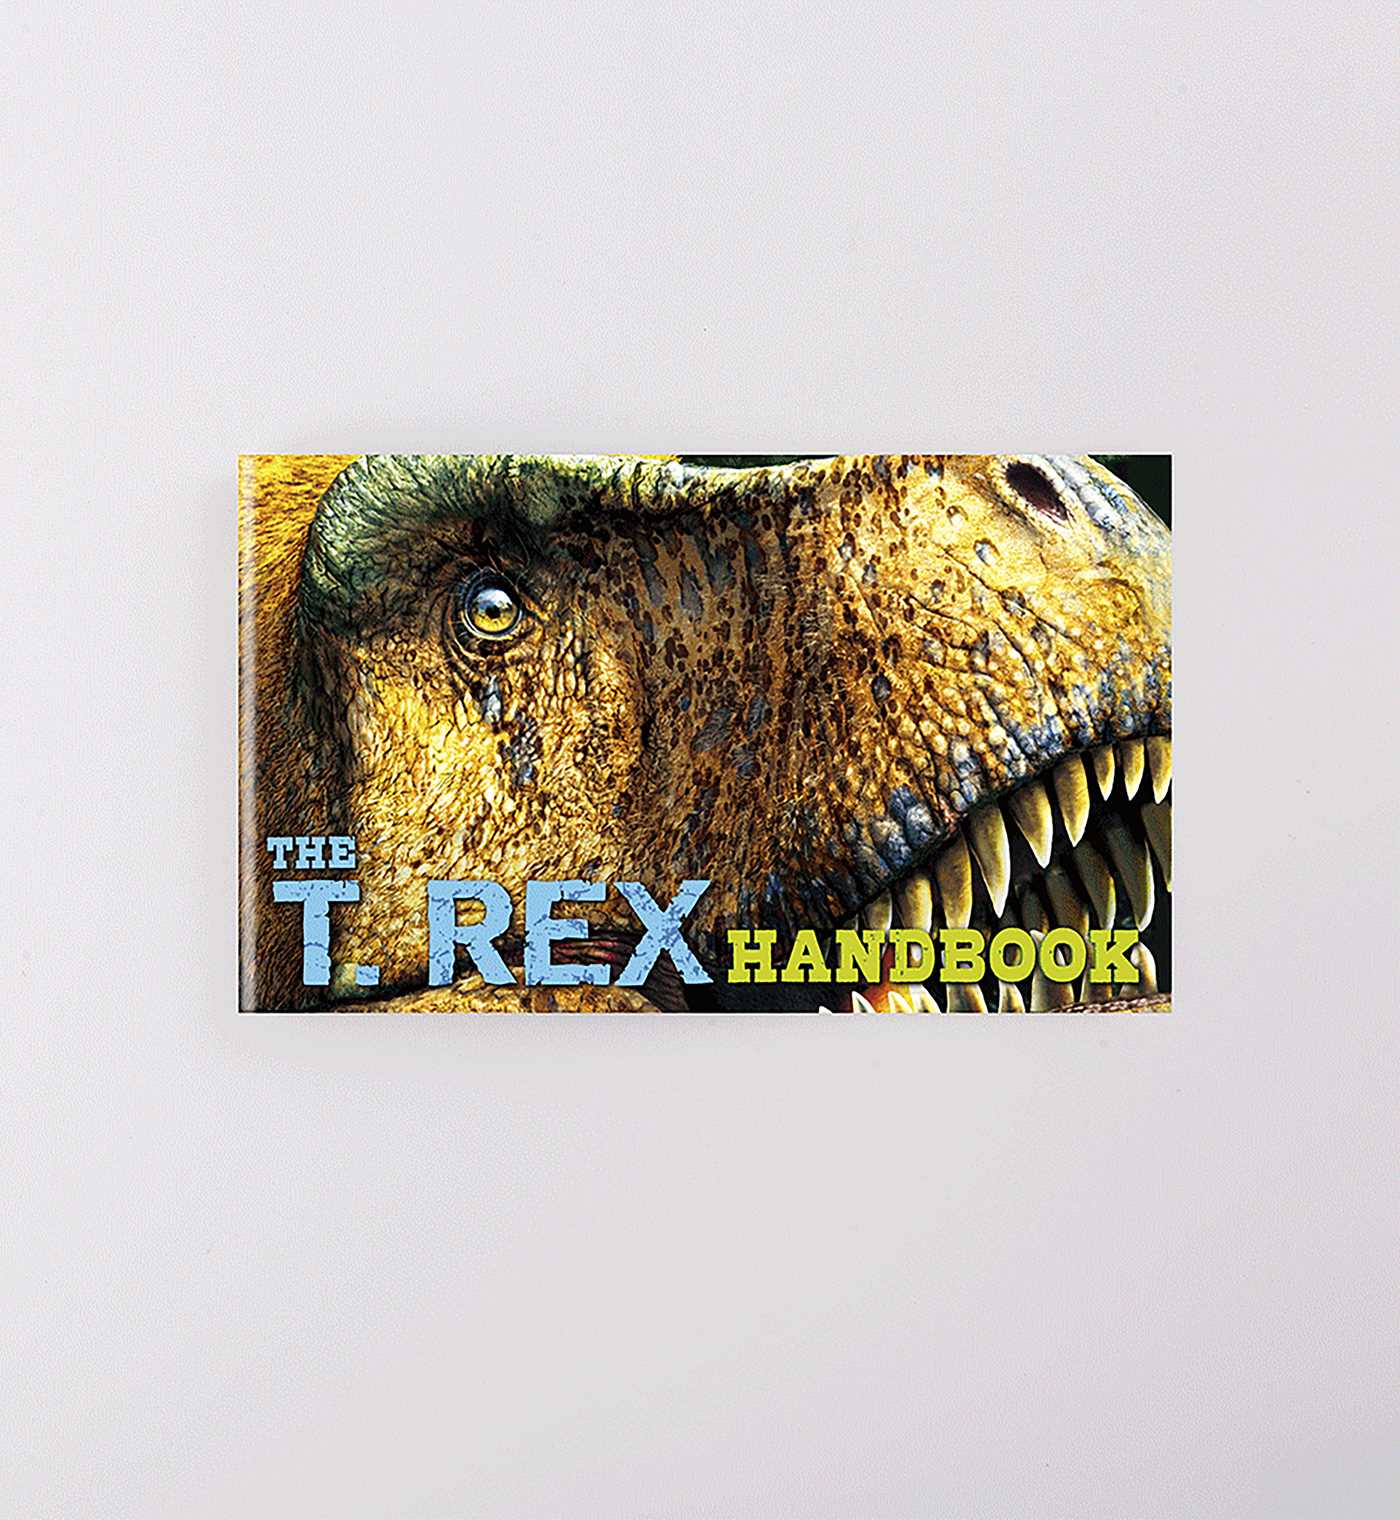 Dinosaurs: 550-Piece Jigsaw Puzzle & Book: A 550-Piece Family Jigsaw Puzzle Featuring the T-Rex Handbook!